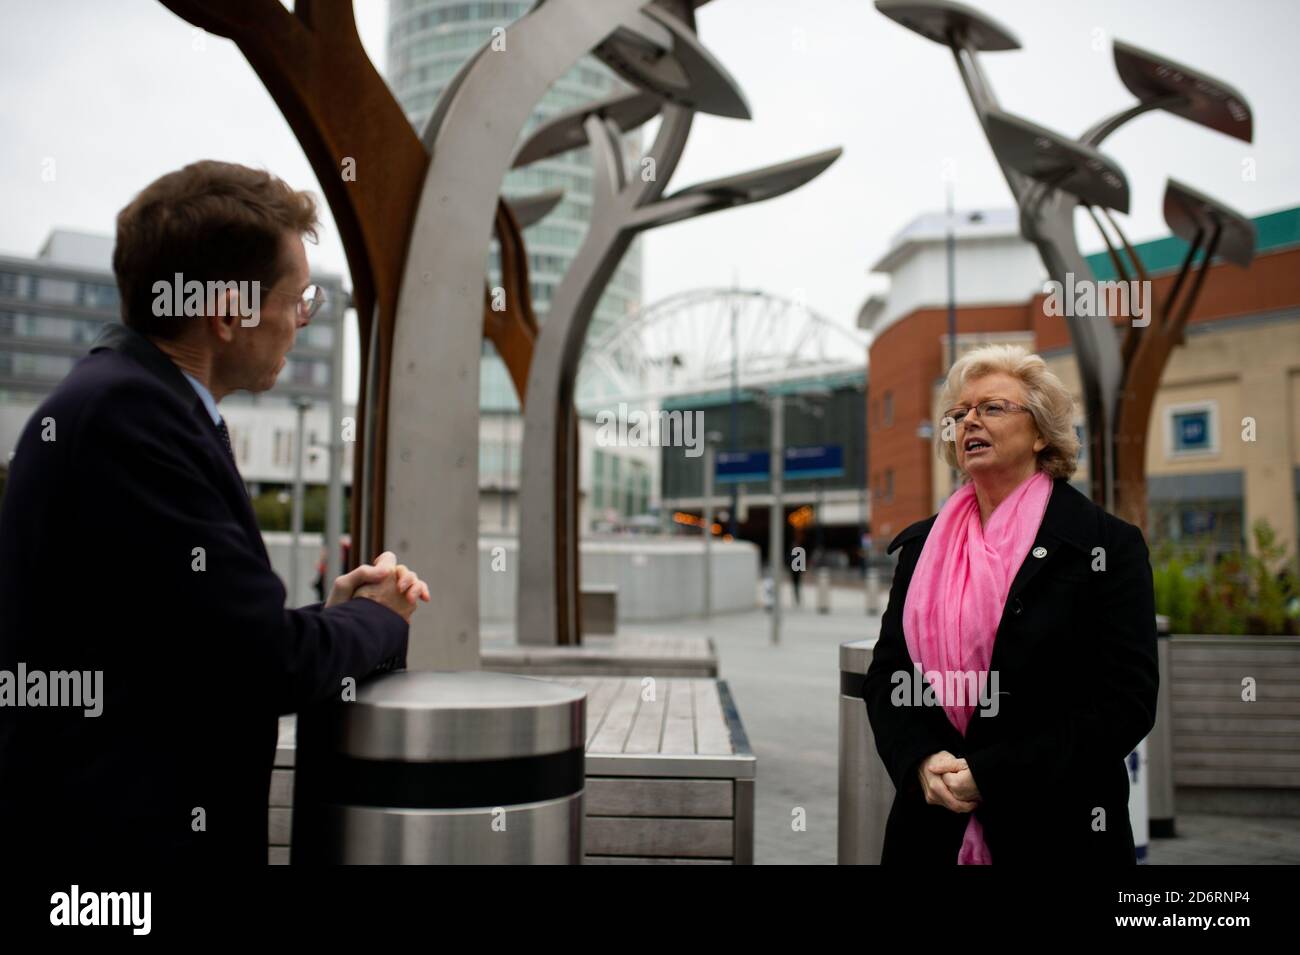 West Midlands Mayor Andy Street and Julie Hambleton, who lost her sister Maxine Hambleton in the 1974 attack, by the Birmingham pub bombings memorial, following the news that Home Secretary Priti Patel has agreed to look into calls for a public inquiry into the 1974 Birmingham pub bombings. Stock Photo